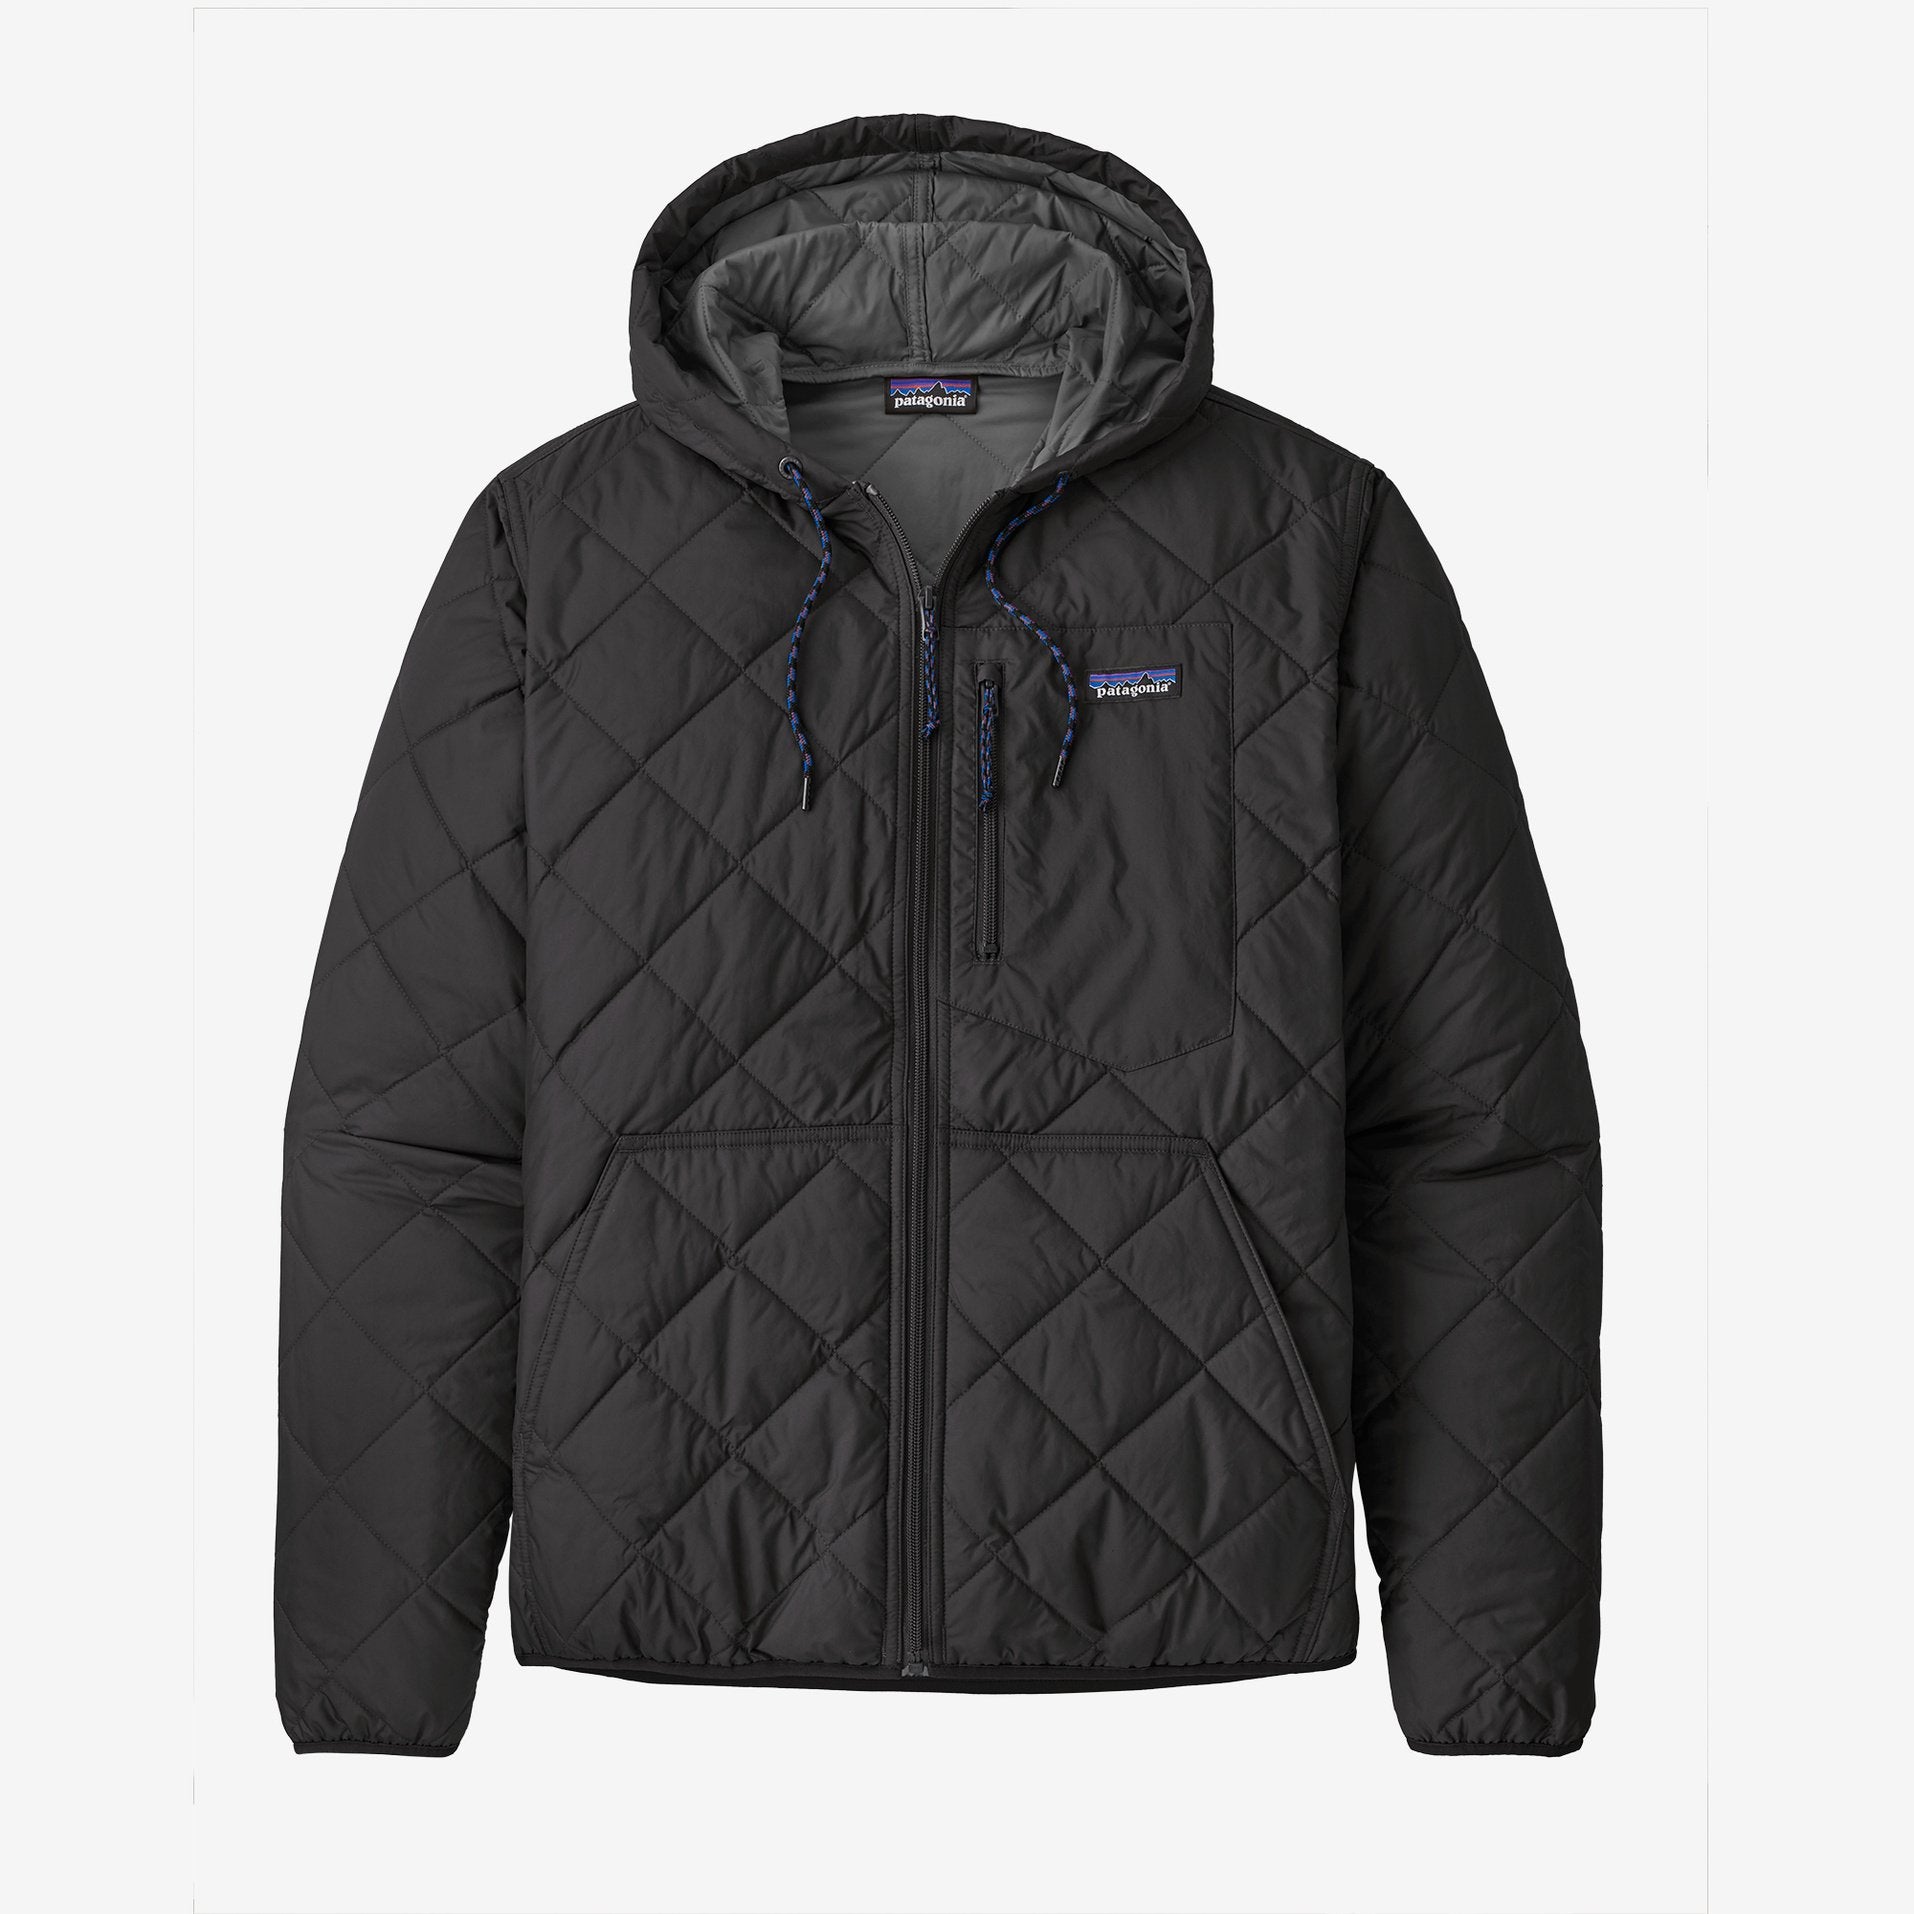 Patagonia Men's Diamond Quilted Bomber Hooded Jacket Apparel Patagonia Black-BLK Small 